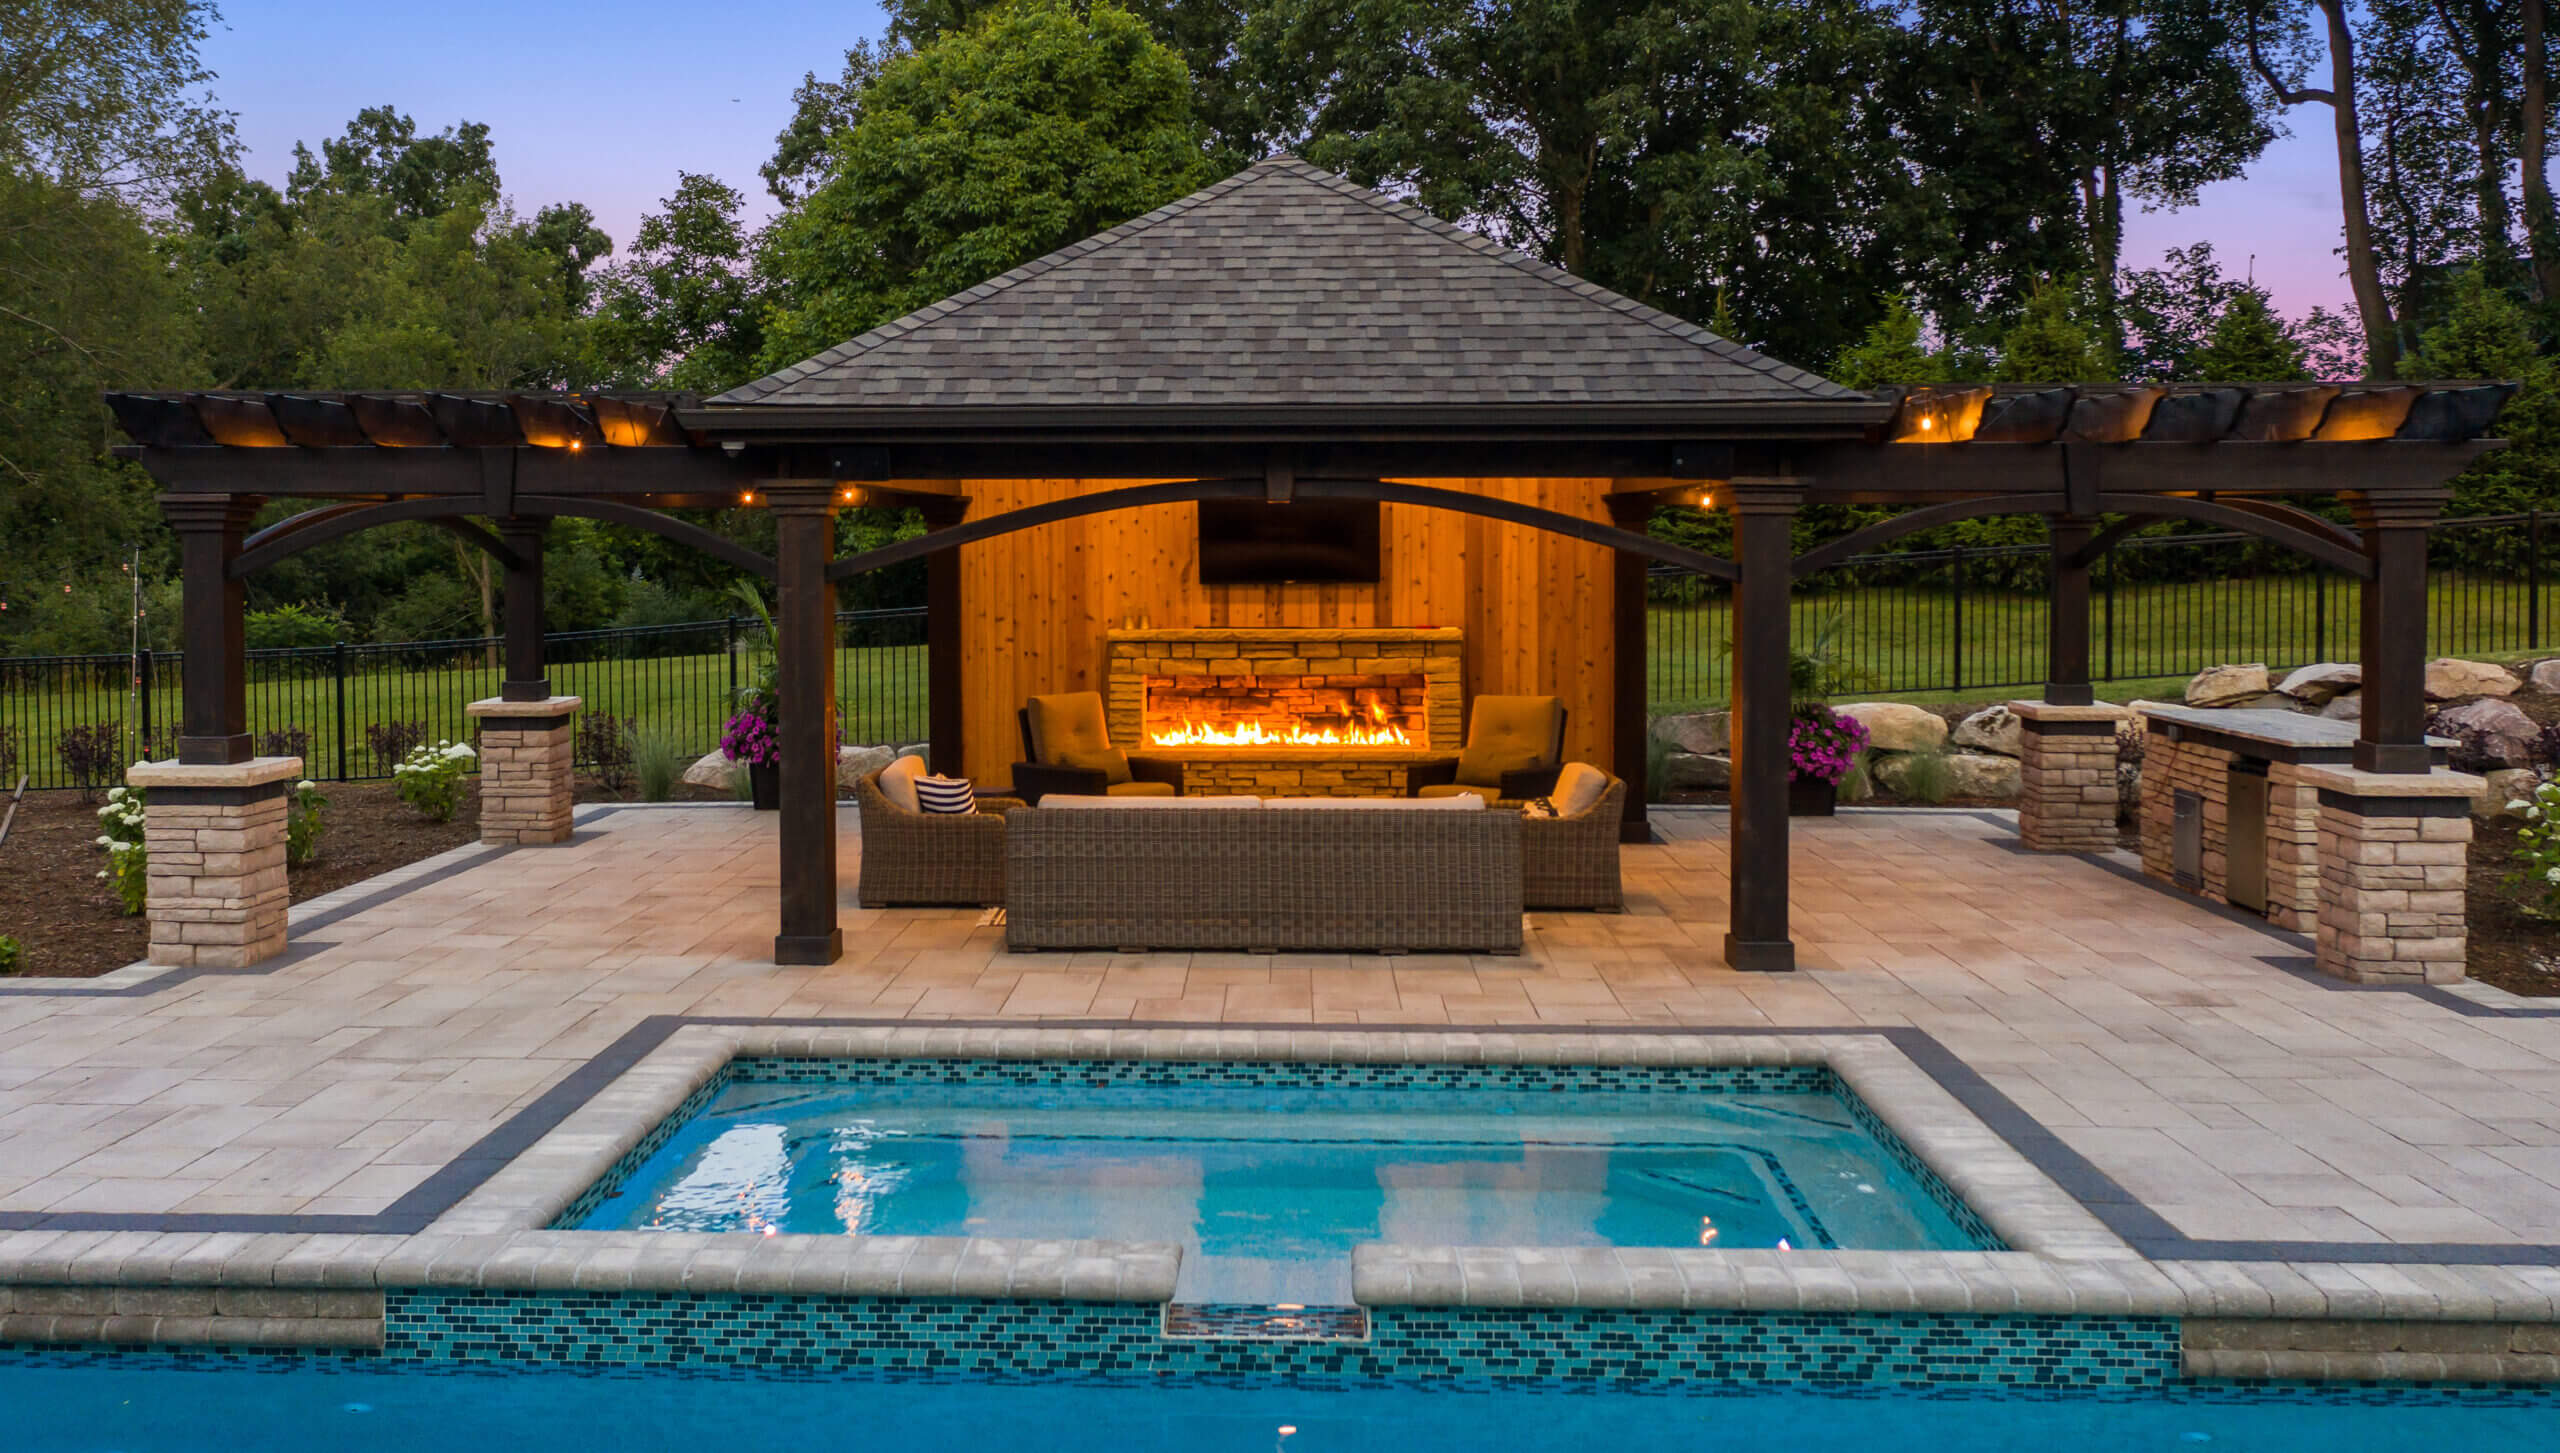 gunite pools, patio pavers, concrete paving, inground pools, pool and spa, fire bowls, patio covers in michigan, patio ideas, pool inspo, gazebos in michigan, cabanas in Michigan, backyard design, backyard landscape design, fire bowls, pool fountains, concrete builders, unilock, outdoor fireplaces in michigan, jacuzzi, outdoor hot tubs